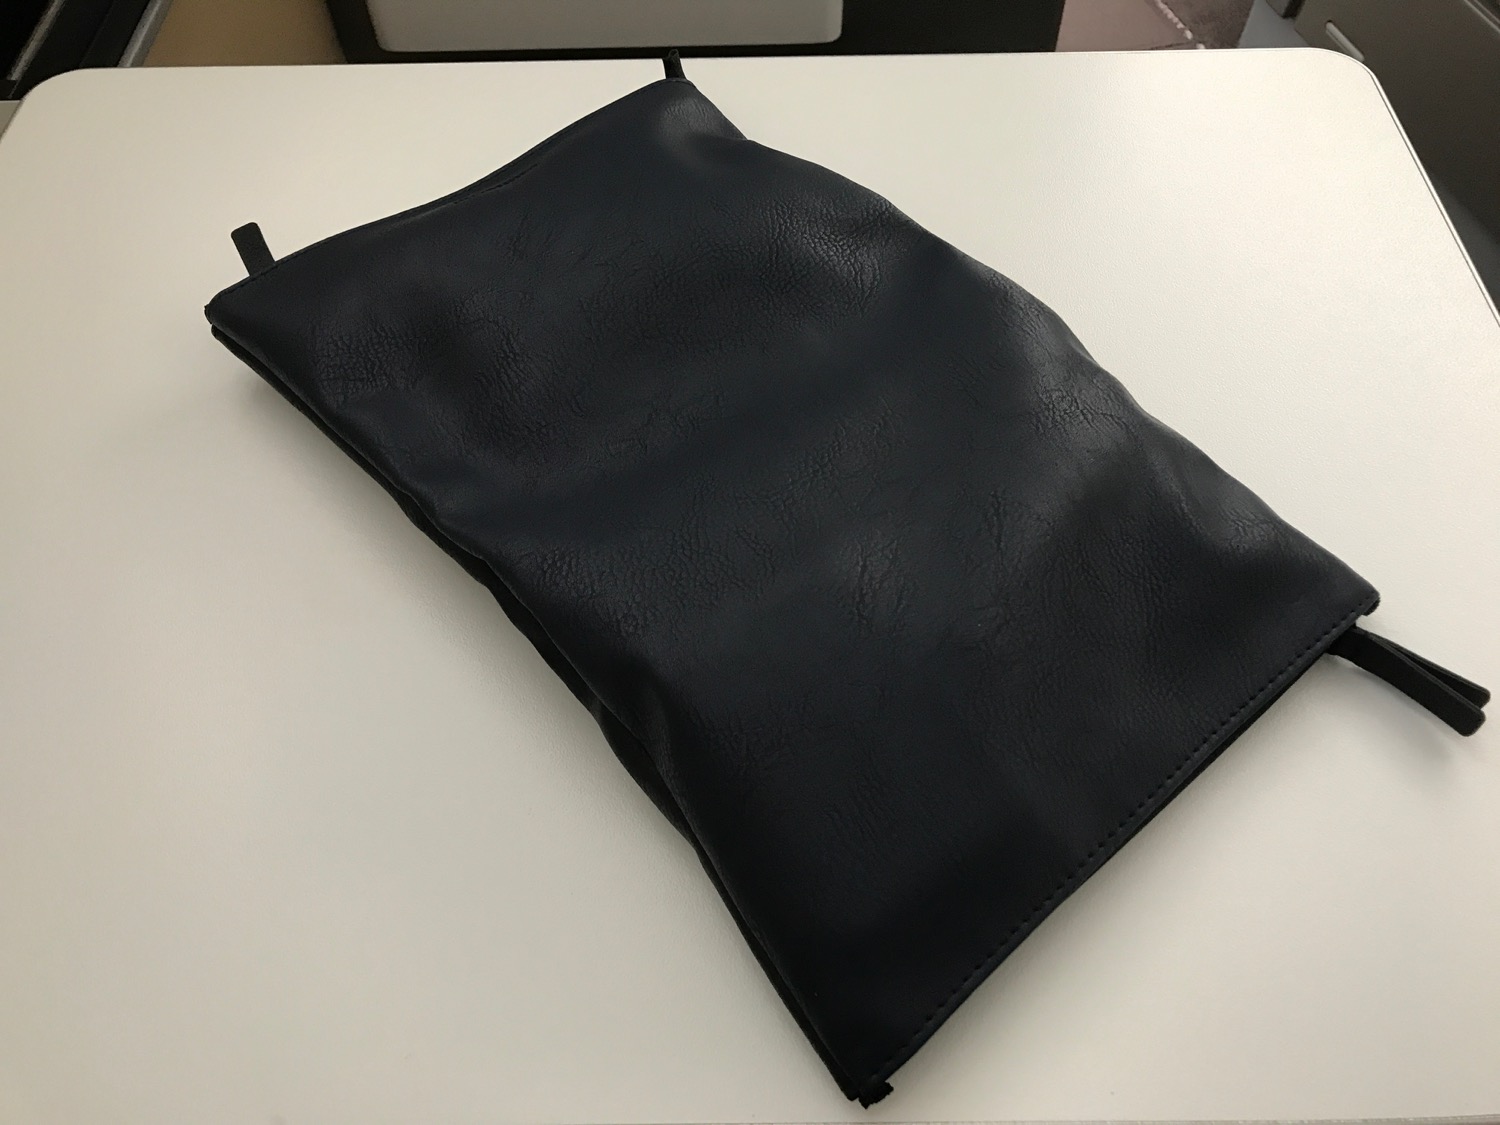 a black leather pouch on a white surface